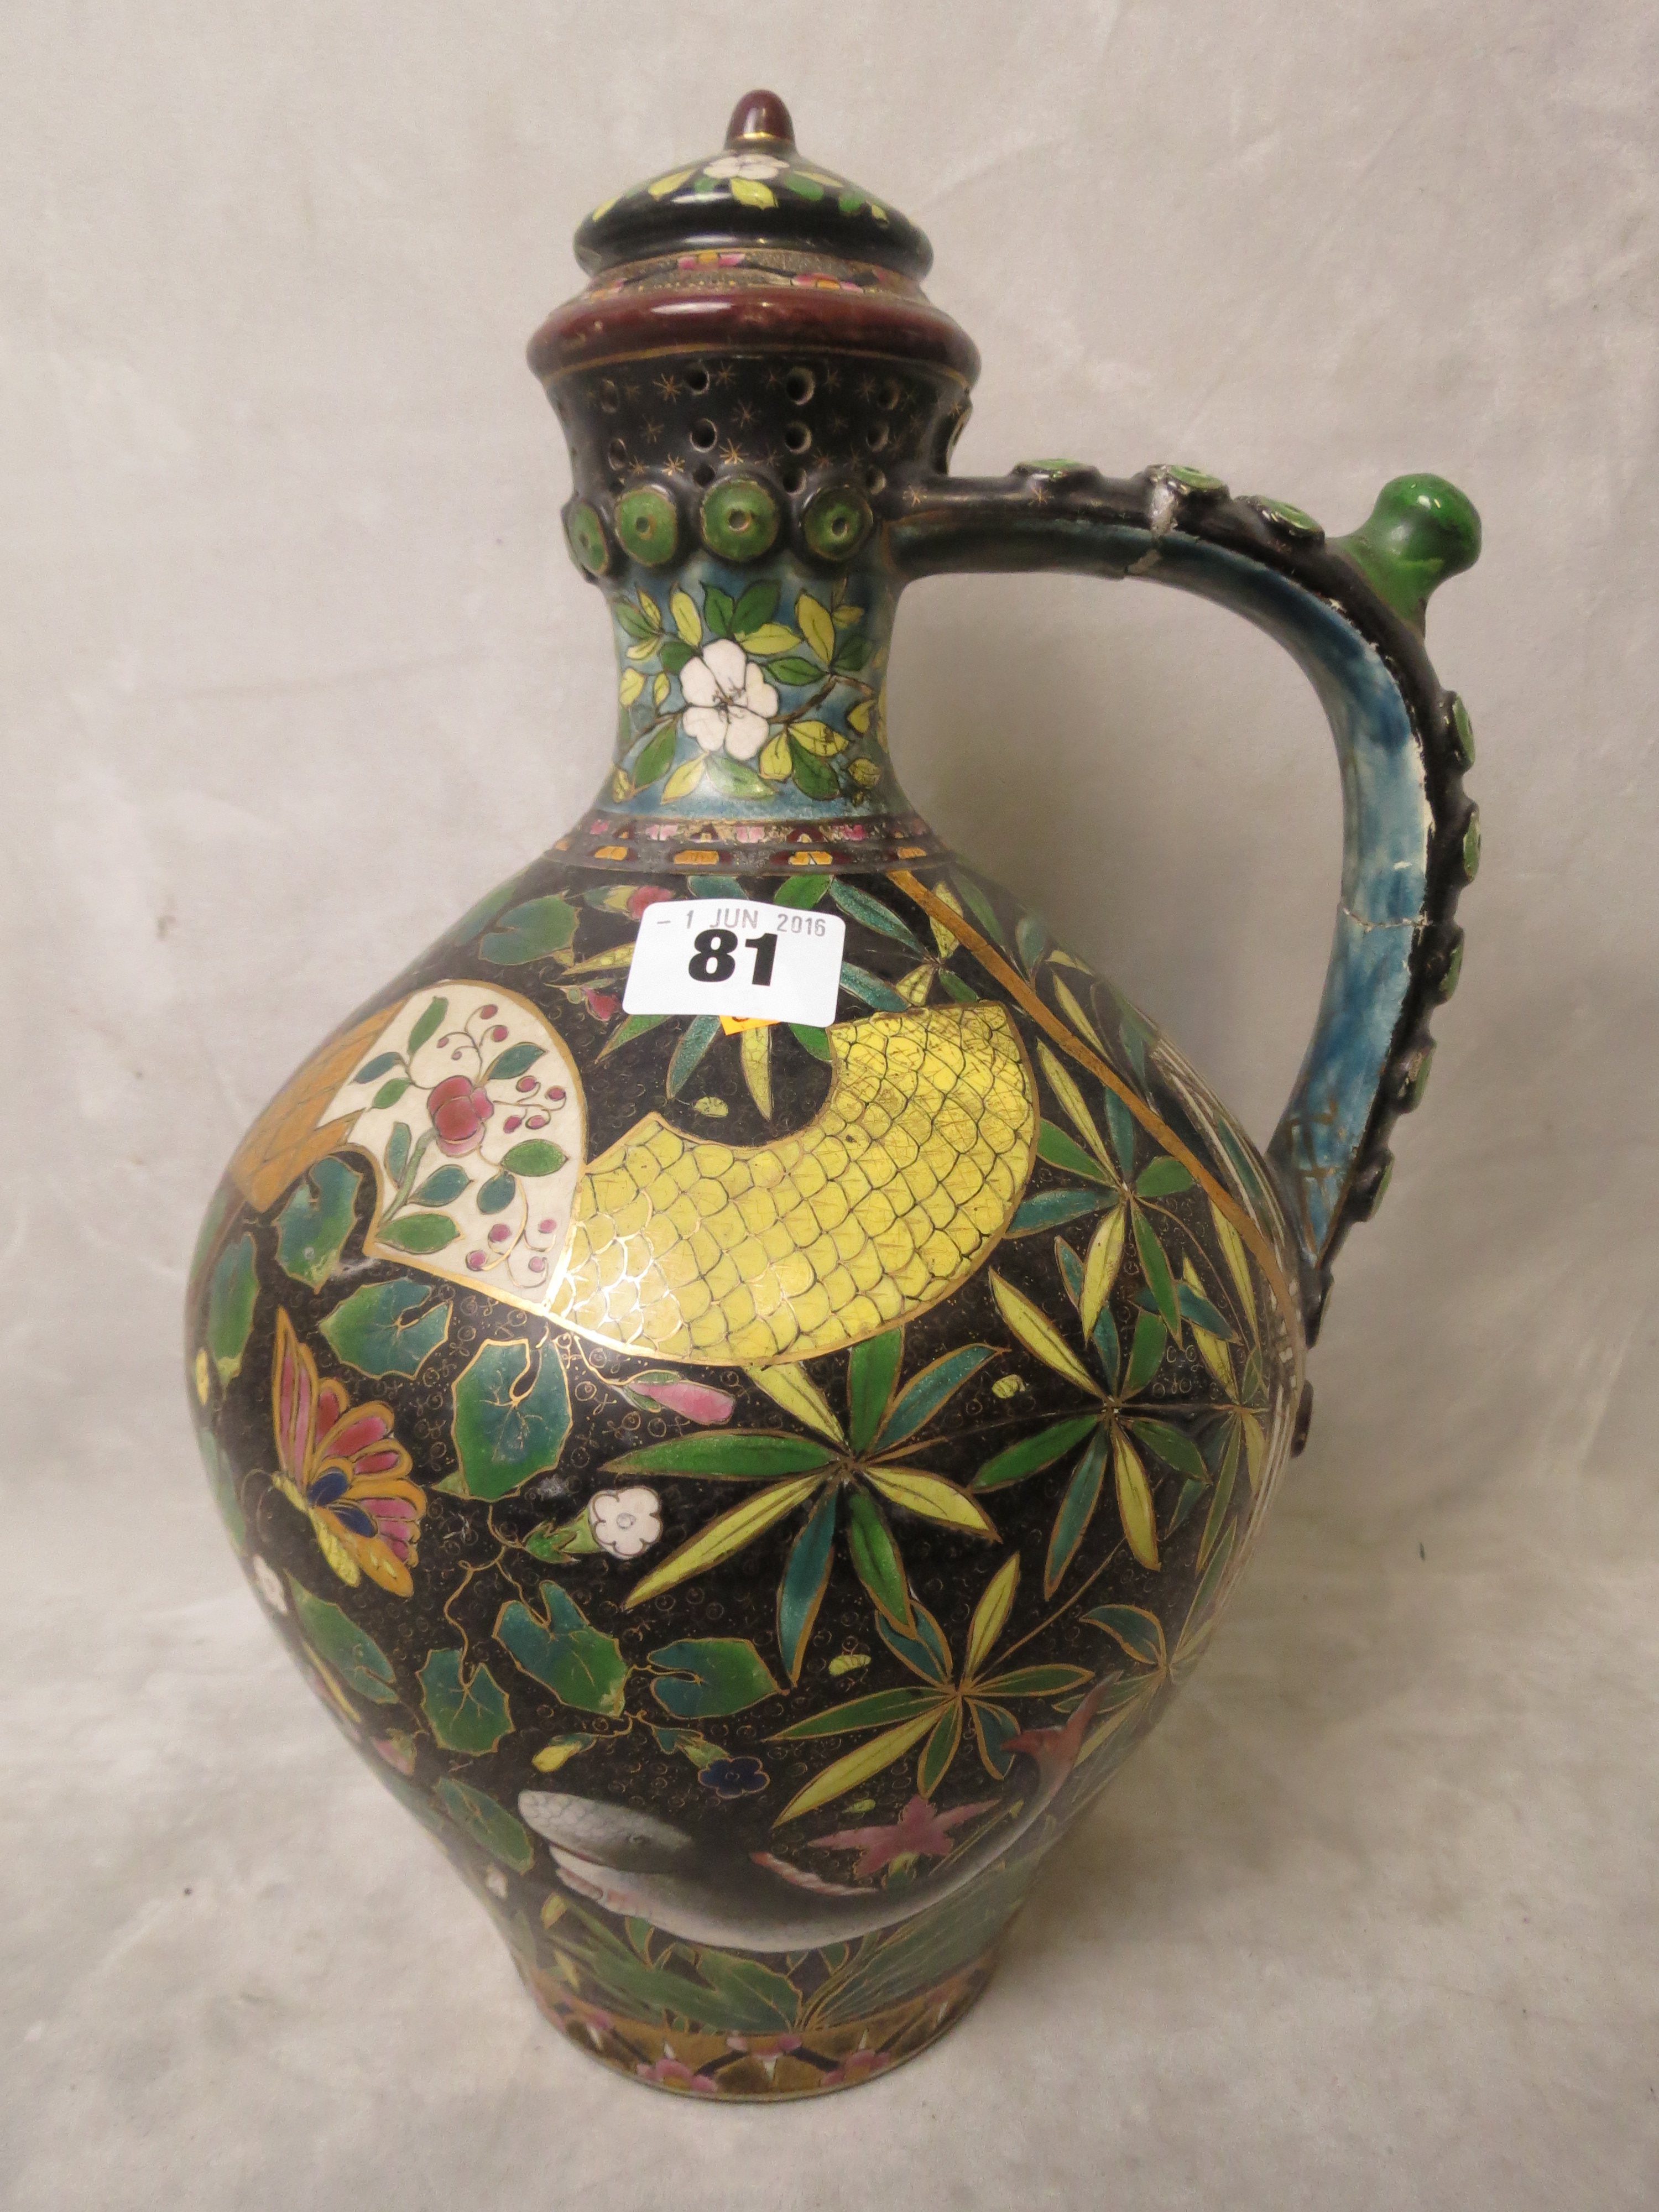 Late 19th century Hungarian pottery ornamental jug decorated with whales, birds and insects in an